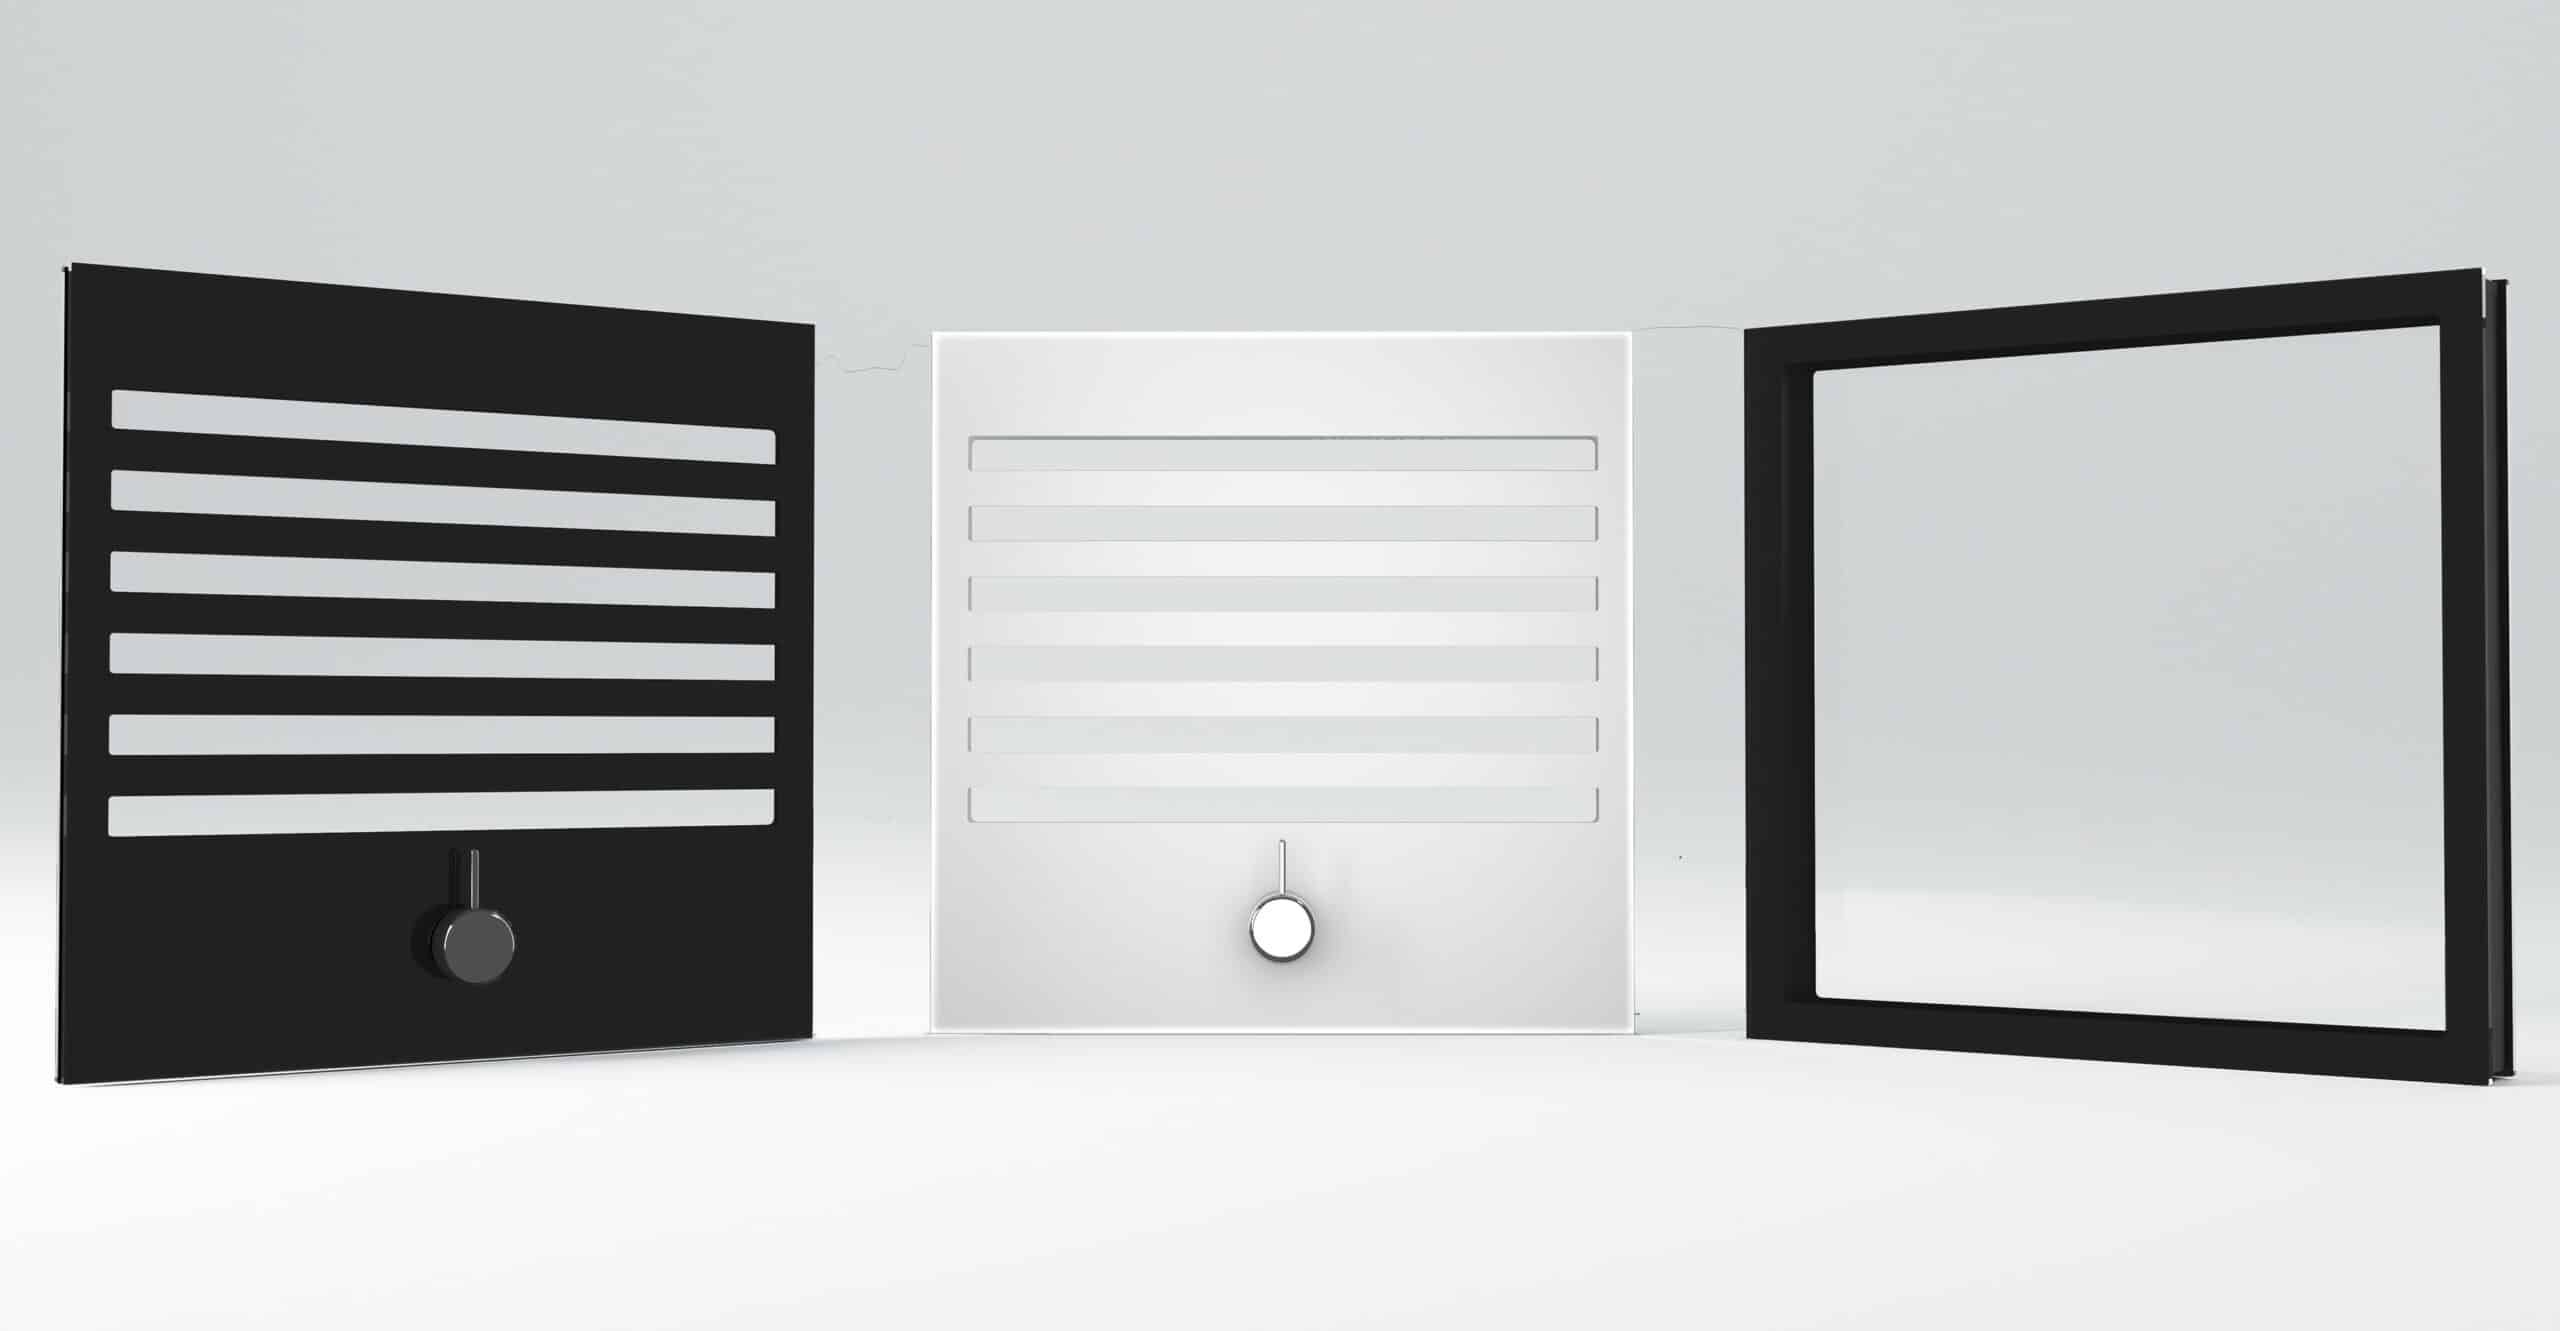 A render image showing all the variations of the new flush vision panels. The first two show the color options (black and white) along with the interstitial operable blind. The final image on the right show the panel with out the blind.